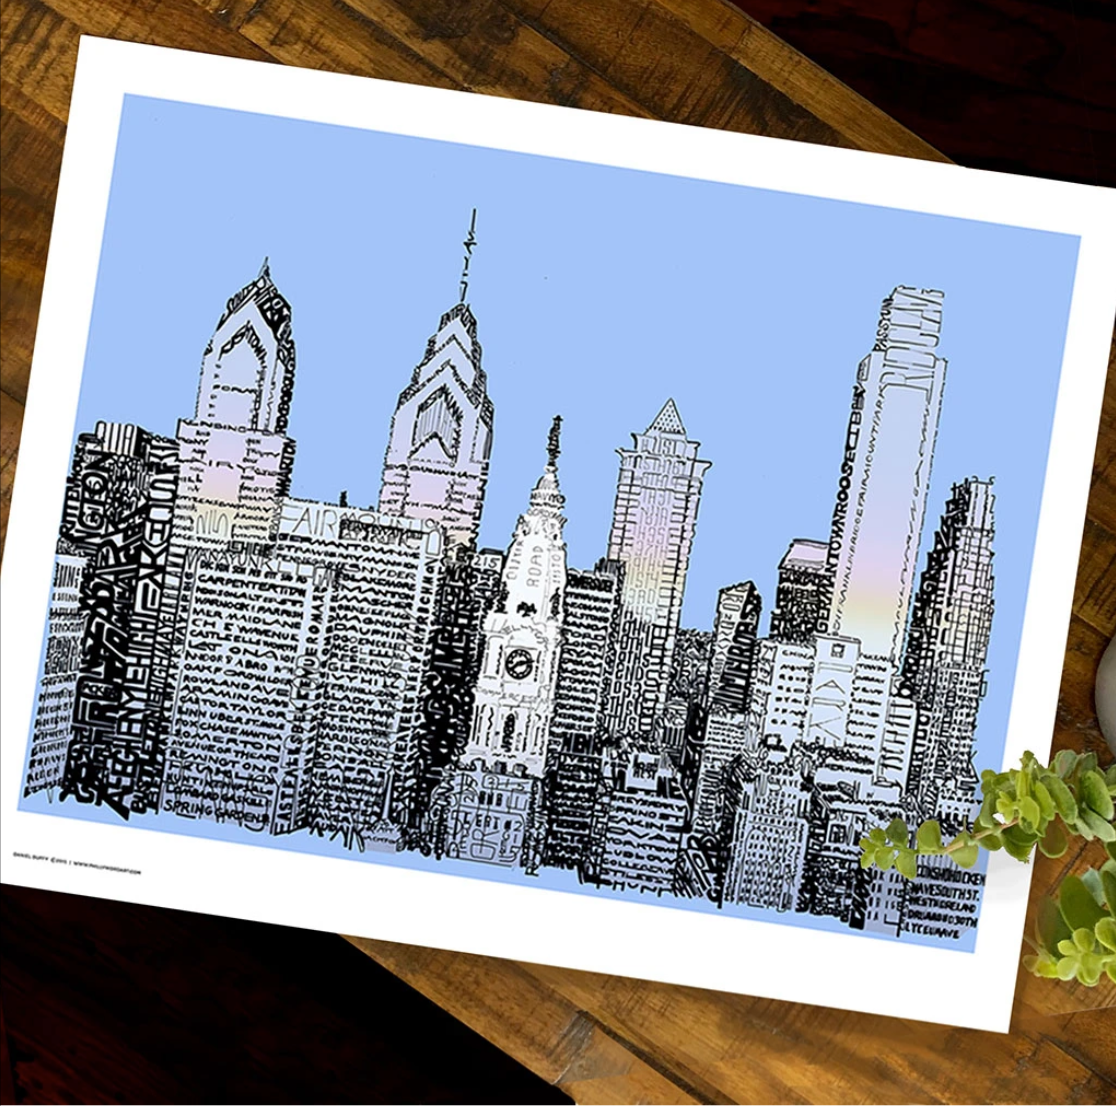 Streets of Philadelphia Print by Philly Word Art